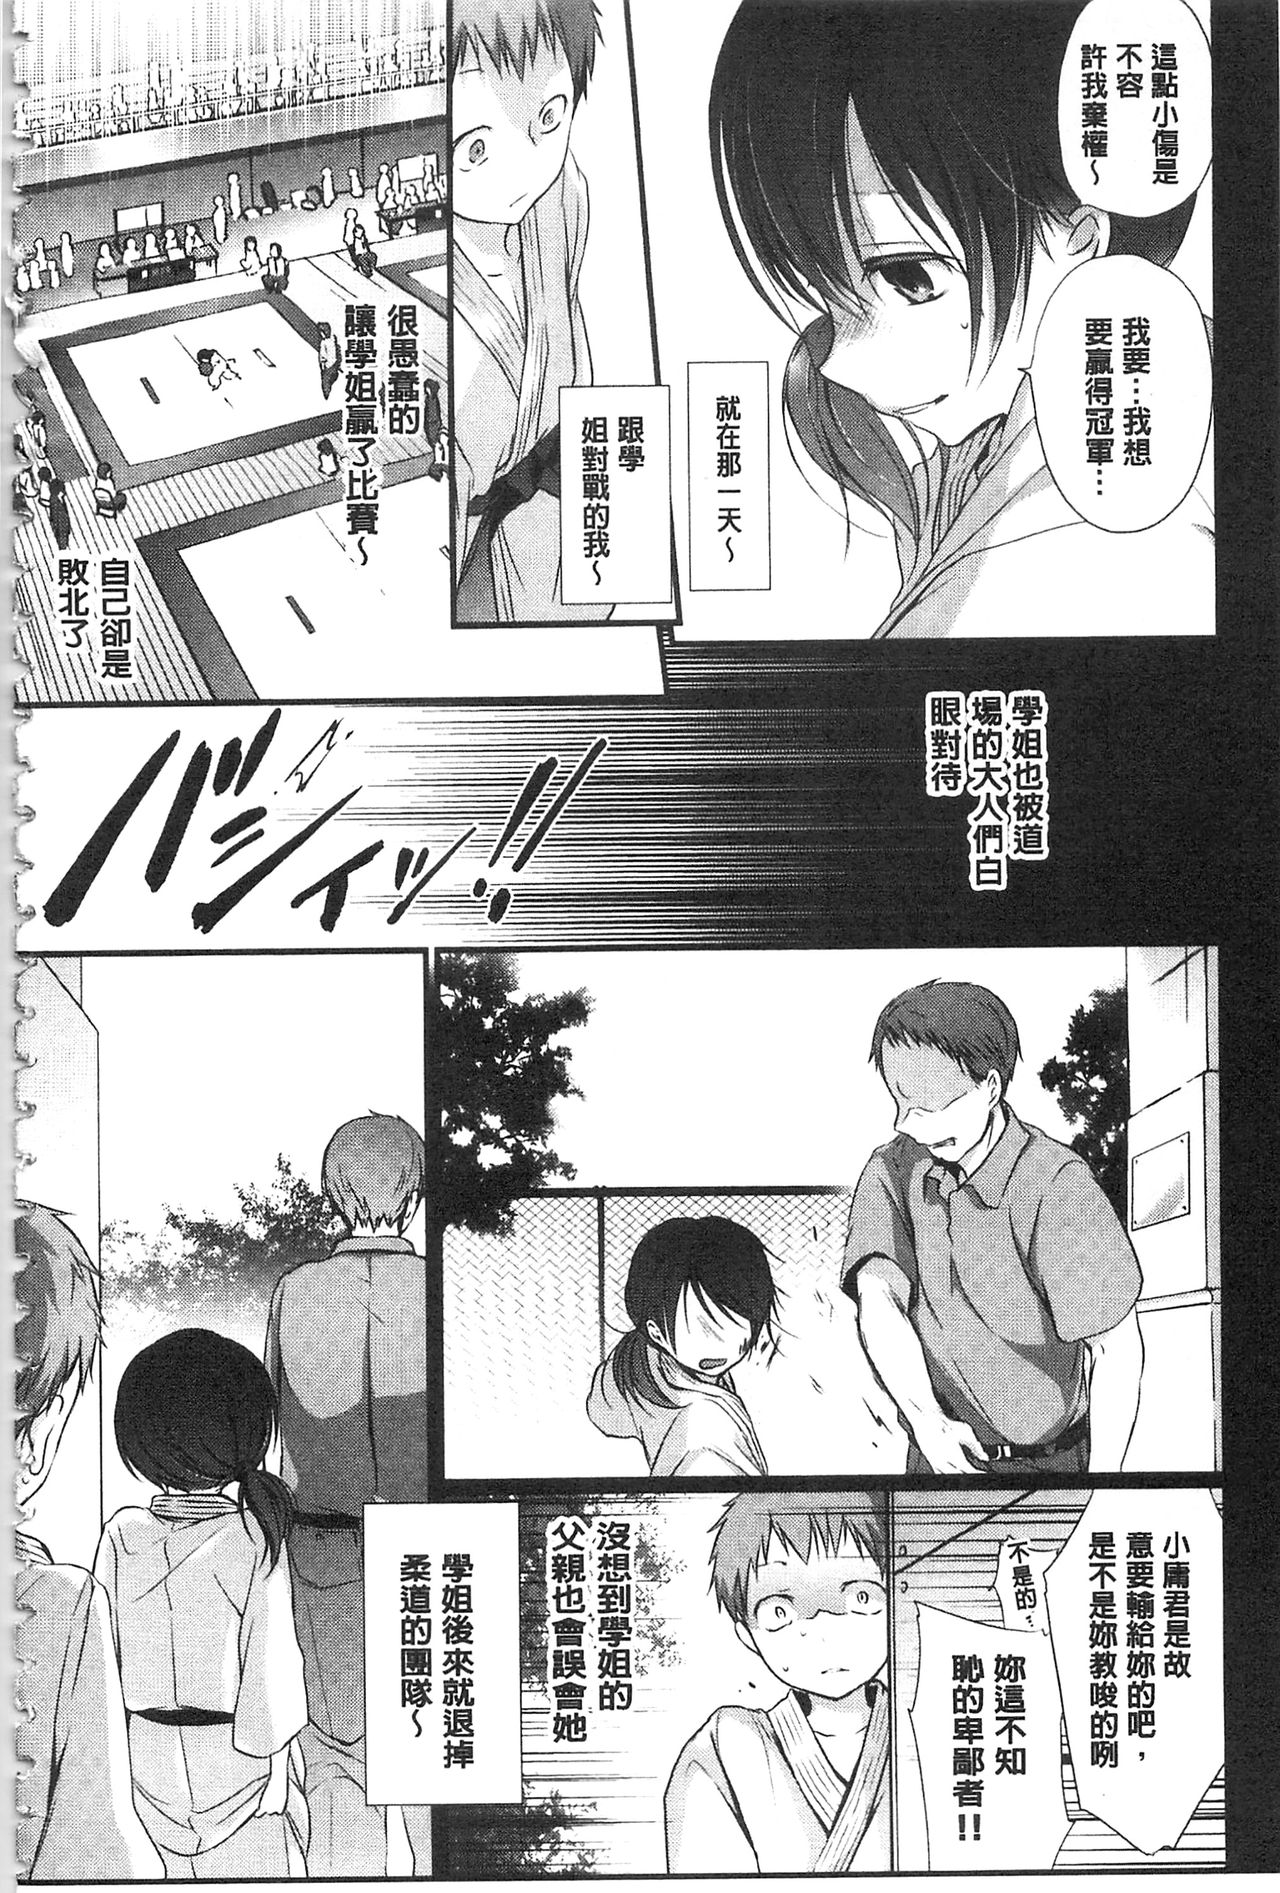 Chinese page 9 full 